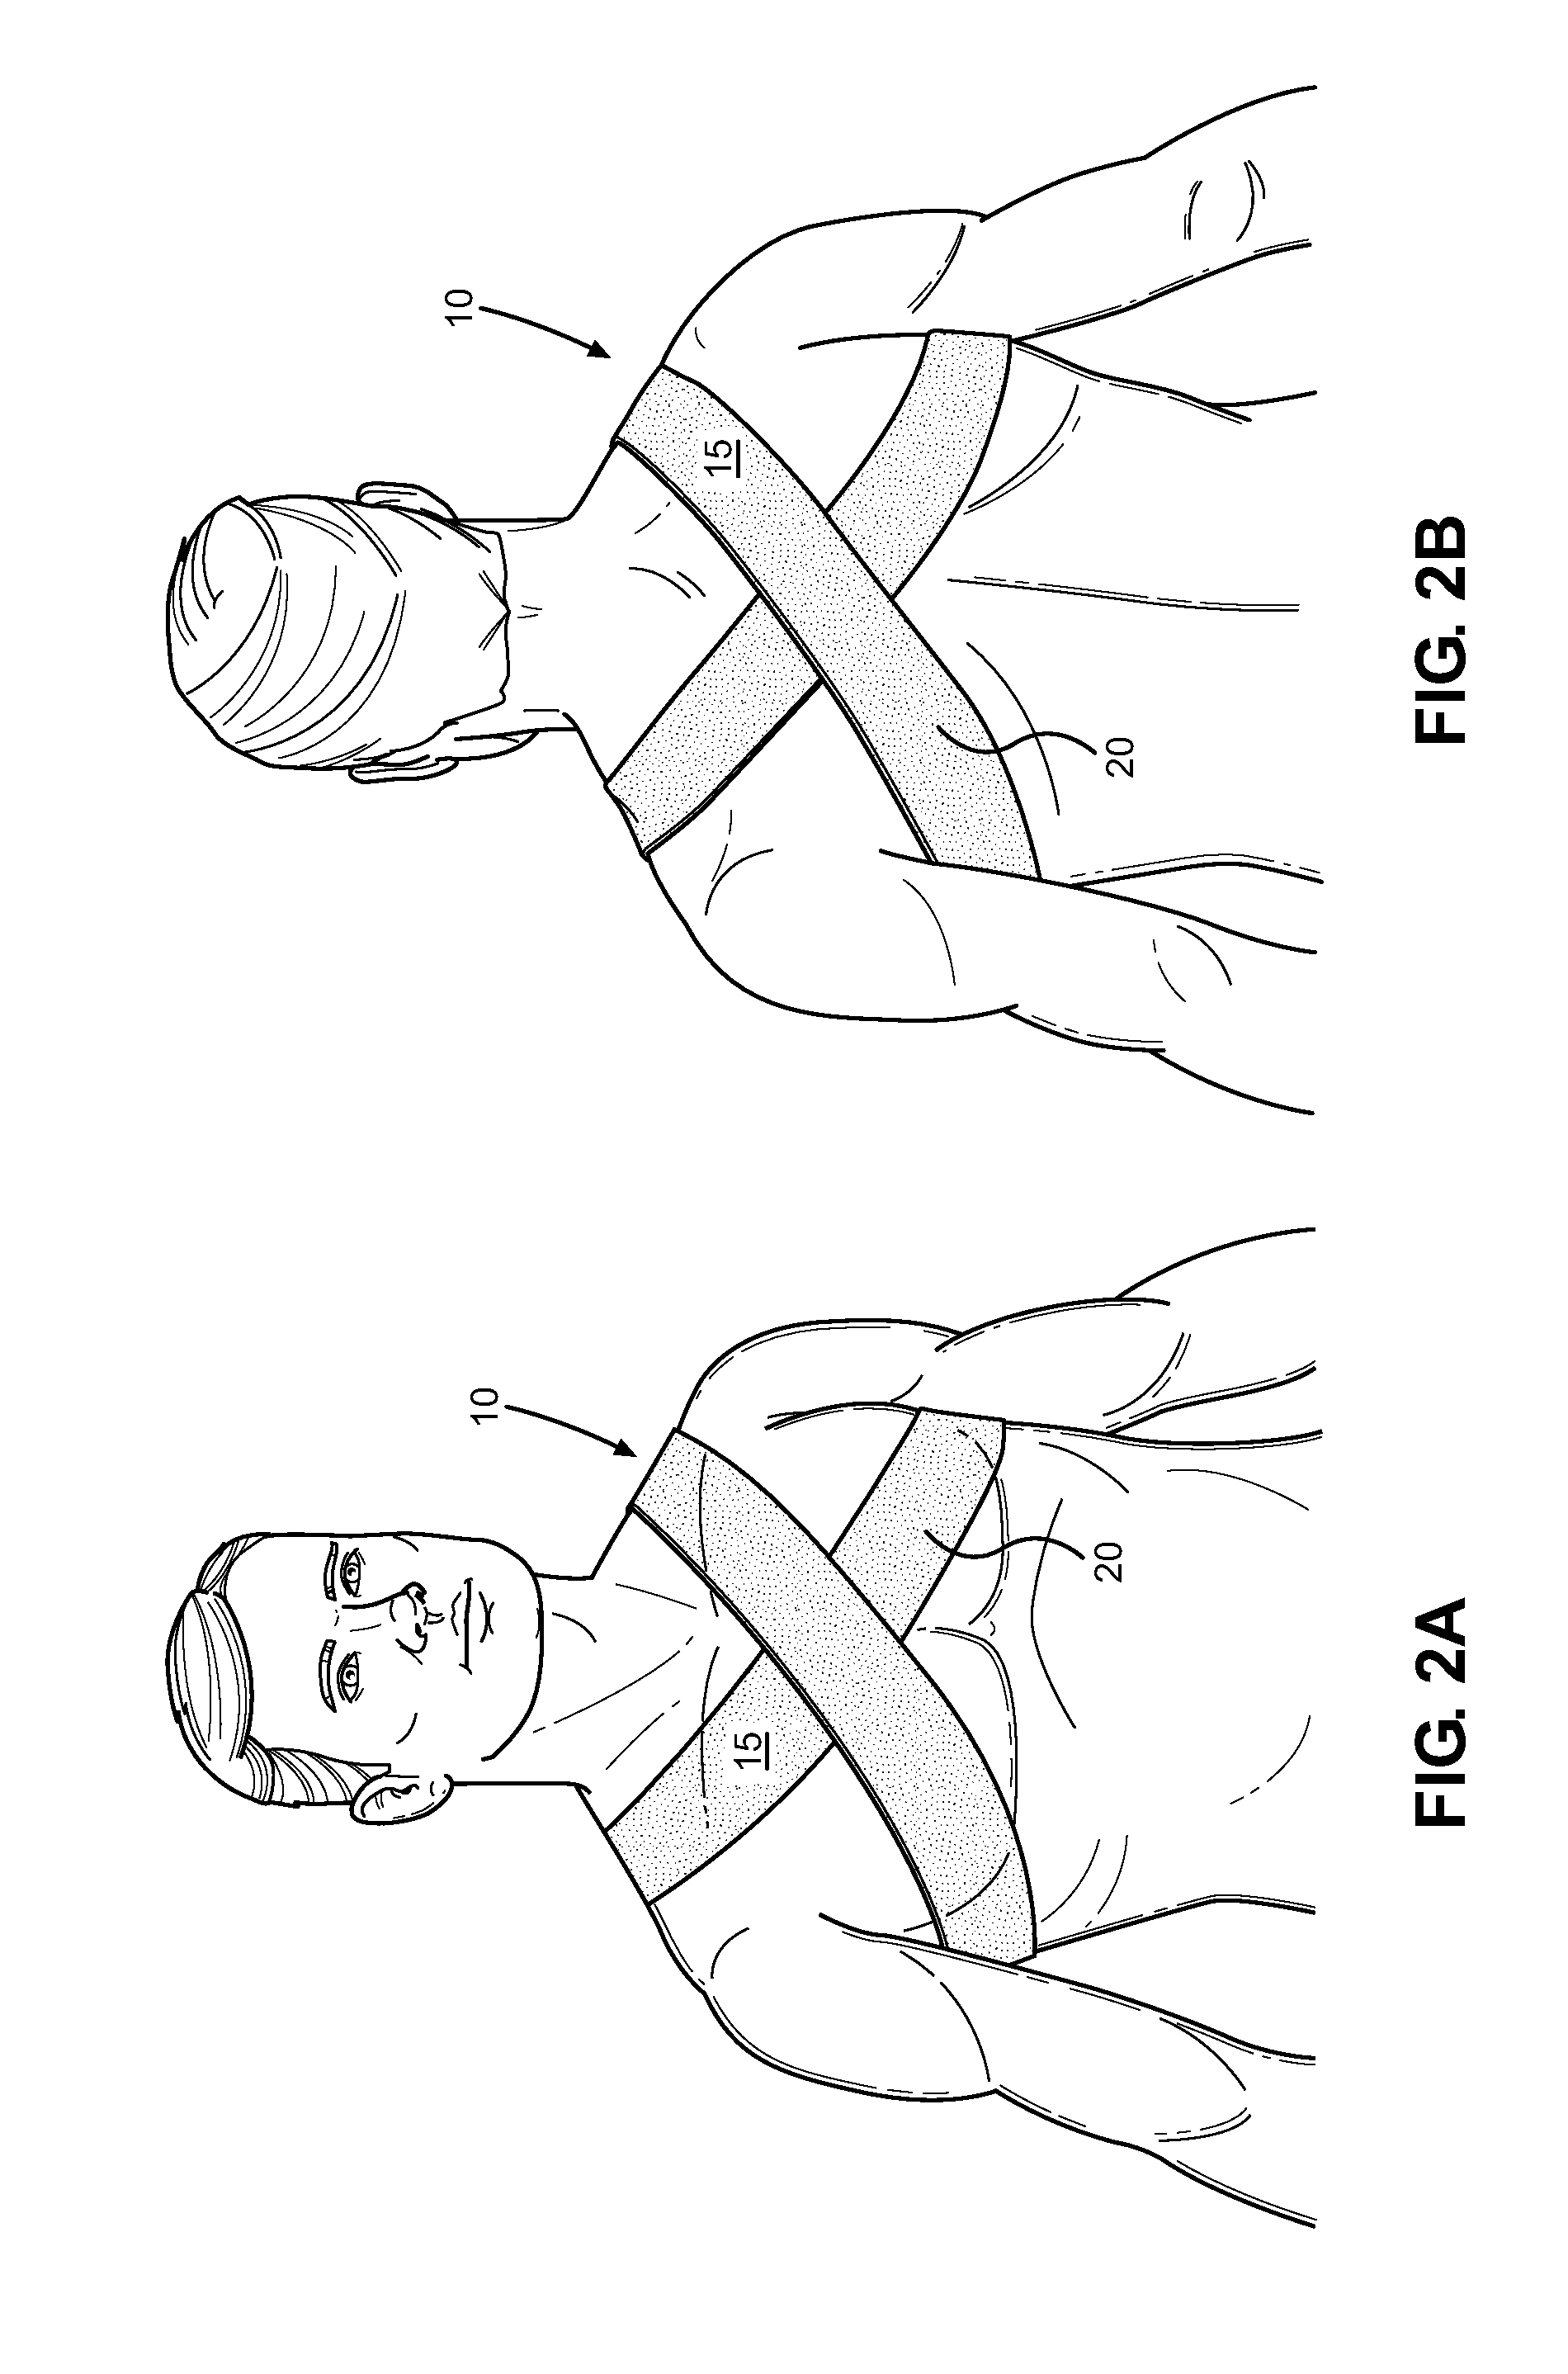 Wearable Topical Drug Delivery Device